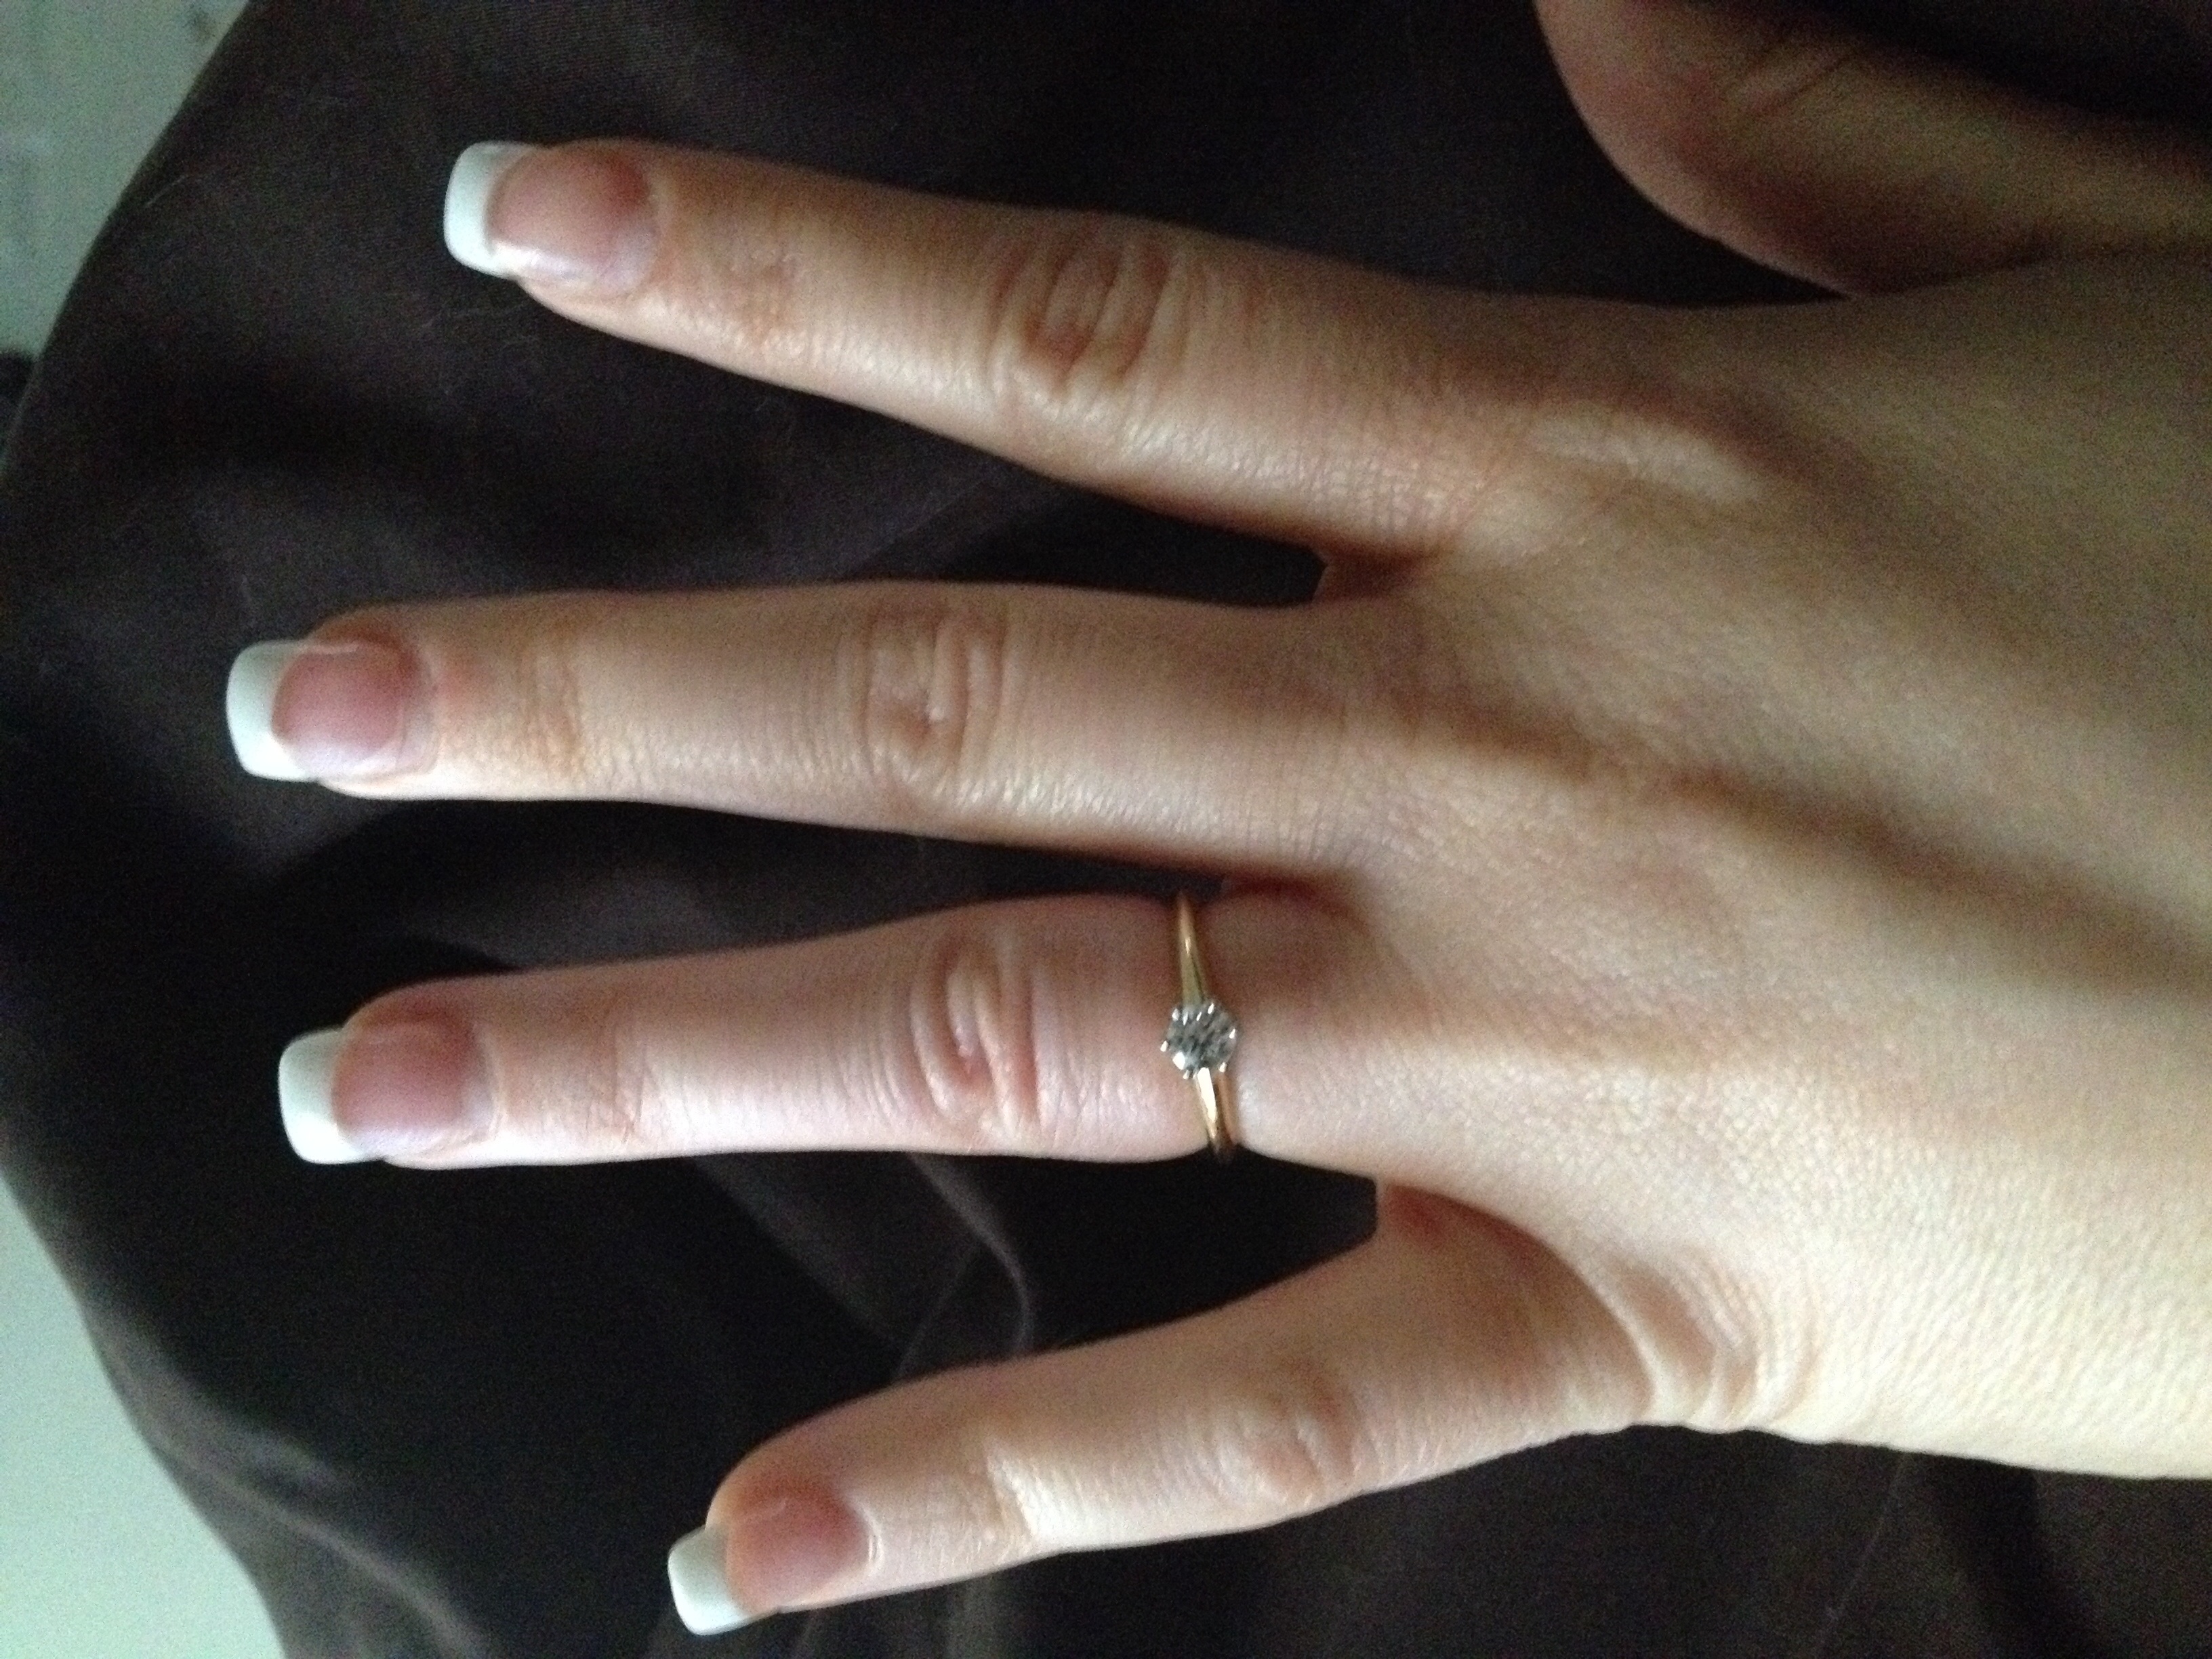 Help! Does my ring look too tight?